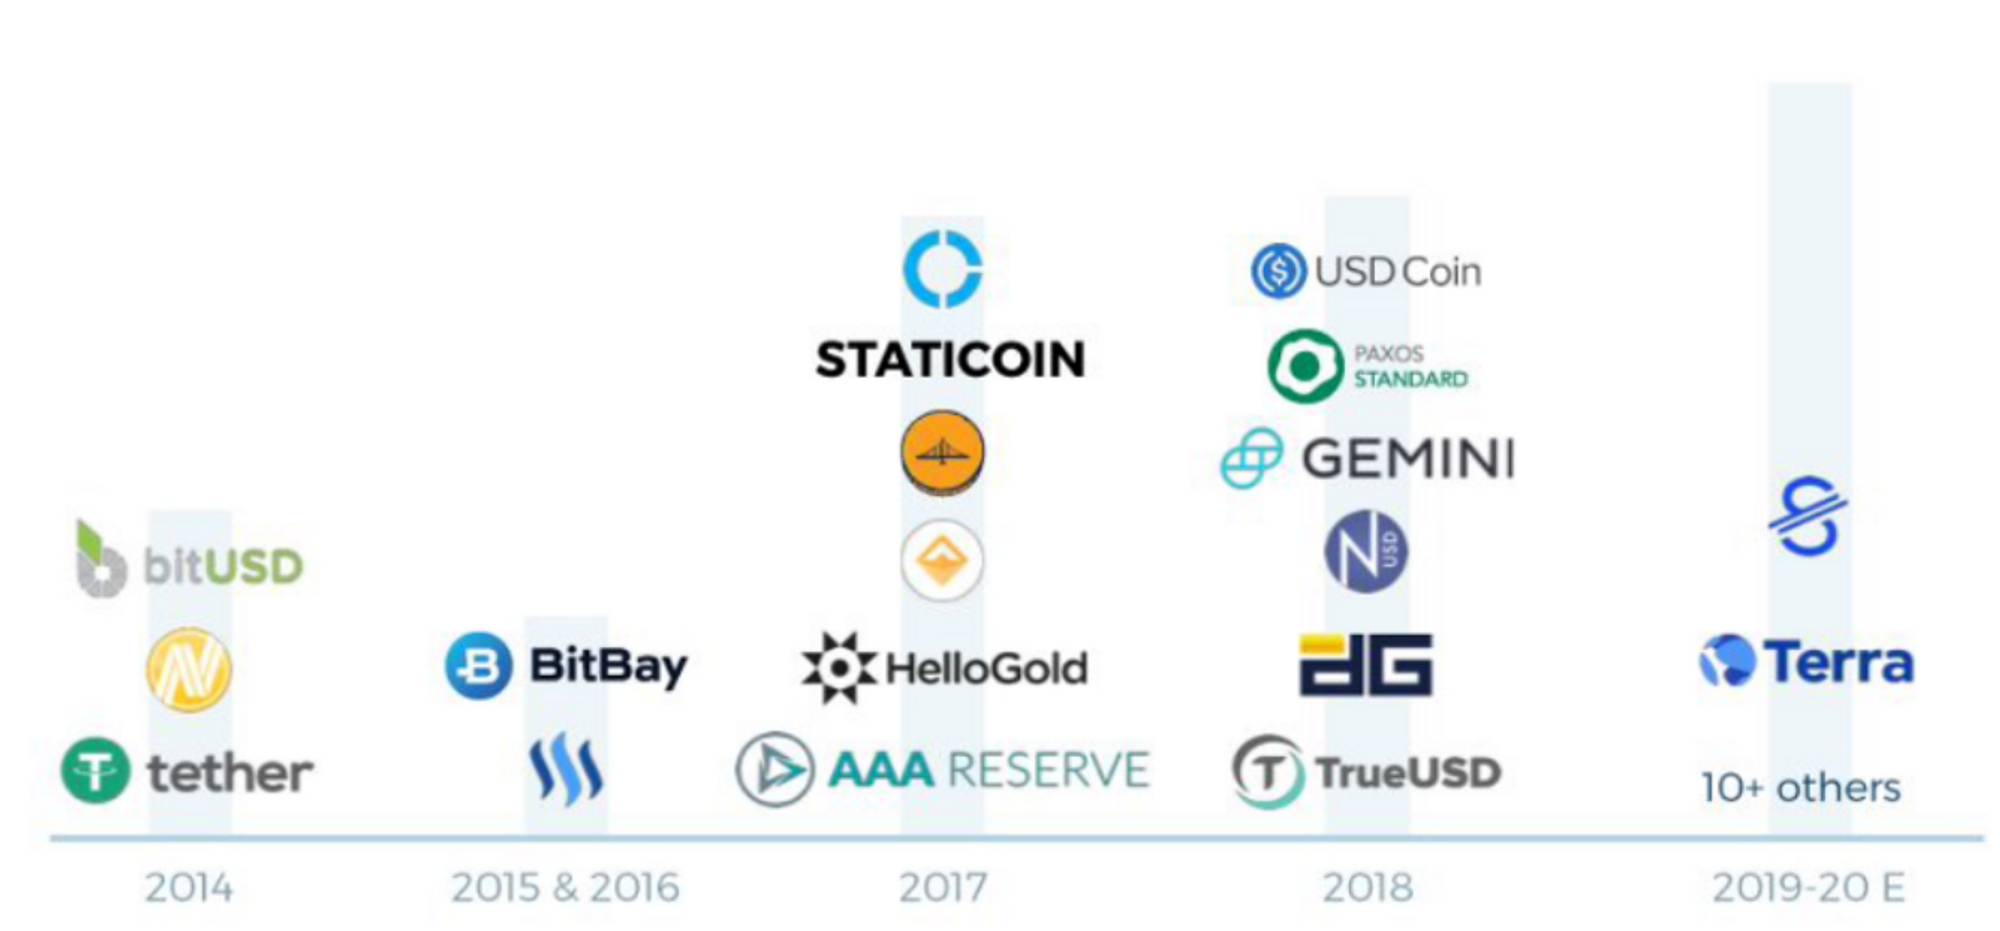 Source: MetisDAO_Medium, Launch Timeline of Stablecoins